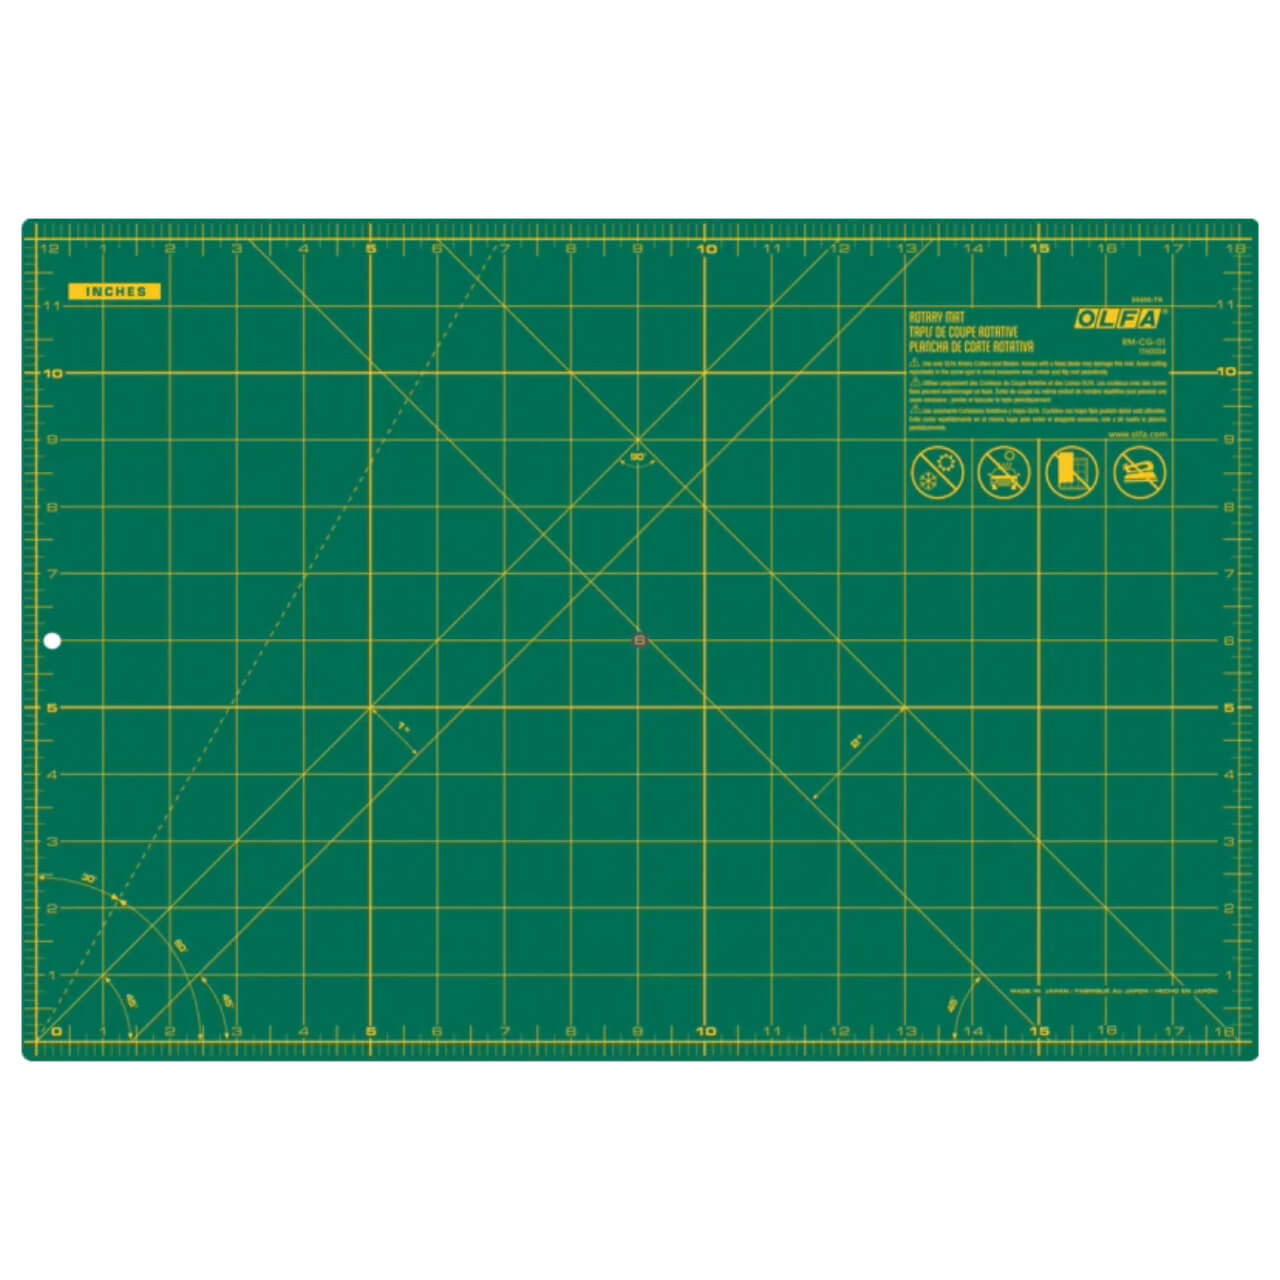 The image shows an OLFA RM-CG 12”x18” Double-Sided Rotary Mat in green with a detailed grid and measurement indicators in yellow. The mat includes various angled guidelines for precision cutting and features the OLFA logo and safety instructions in the top right corner.